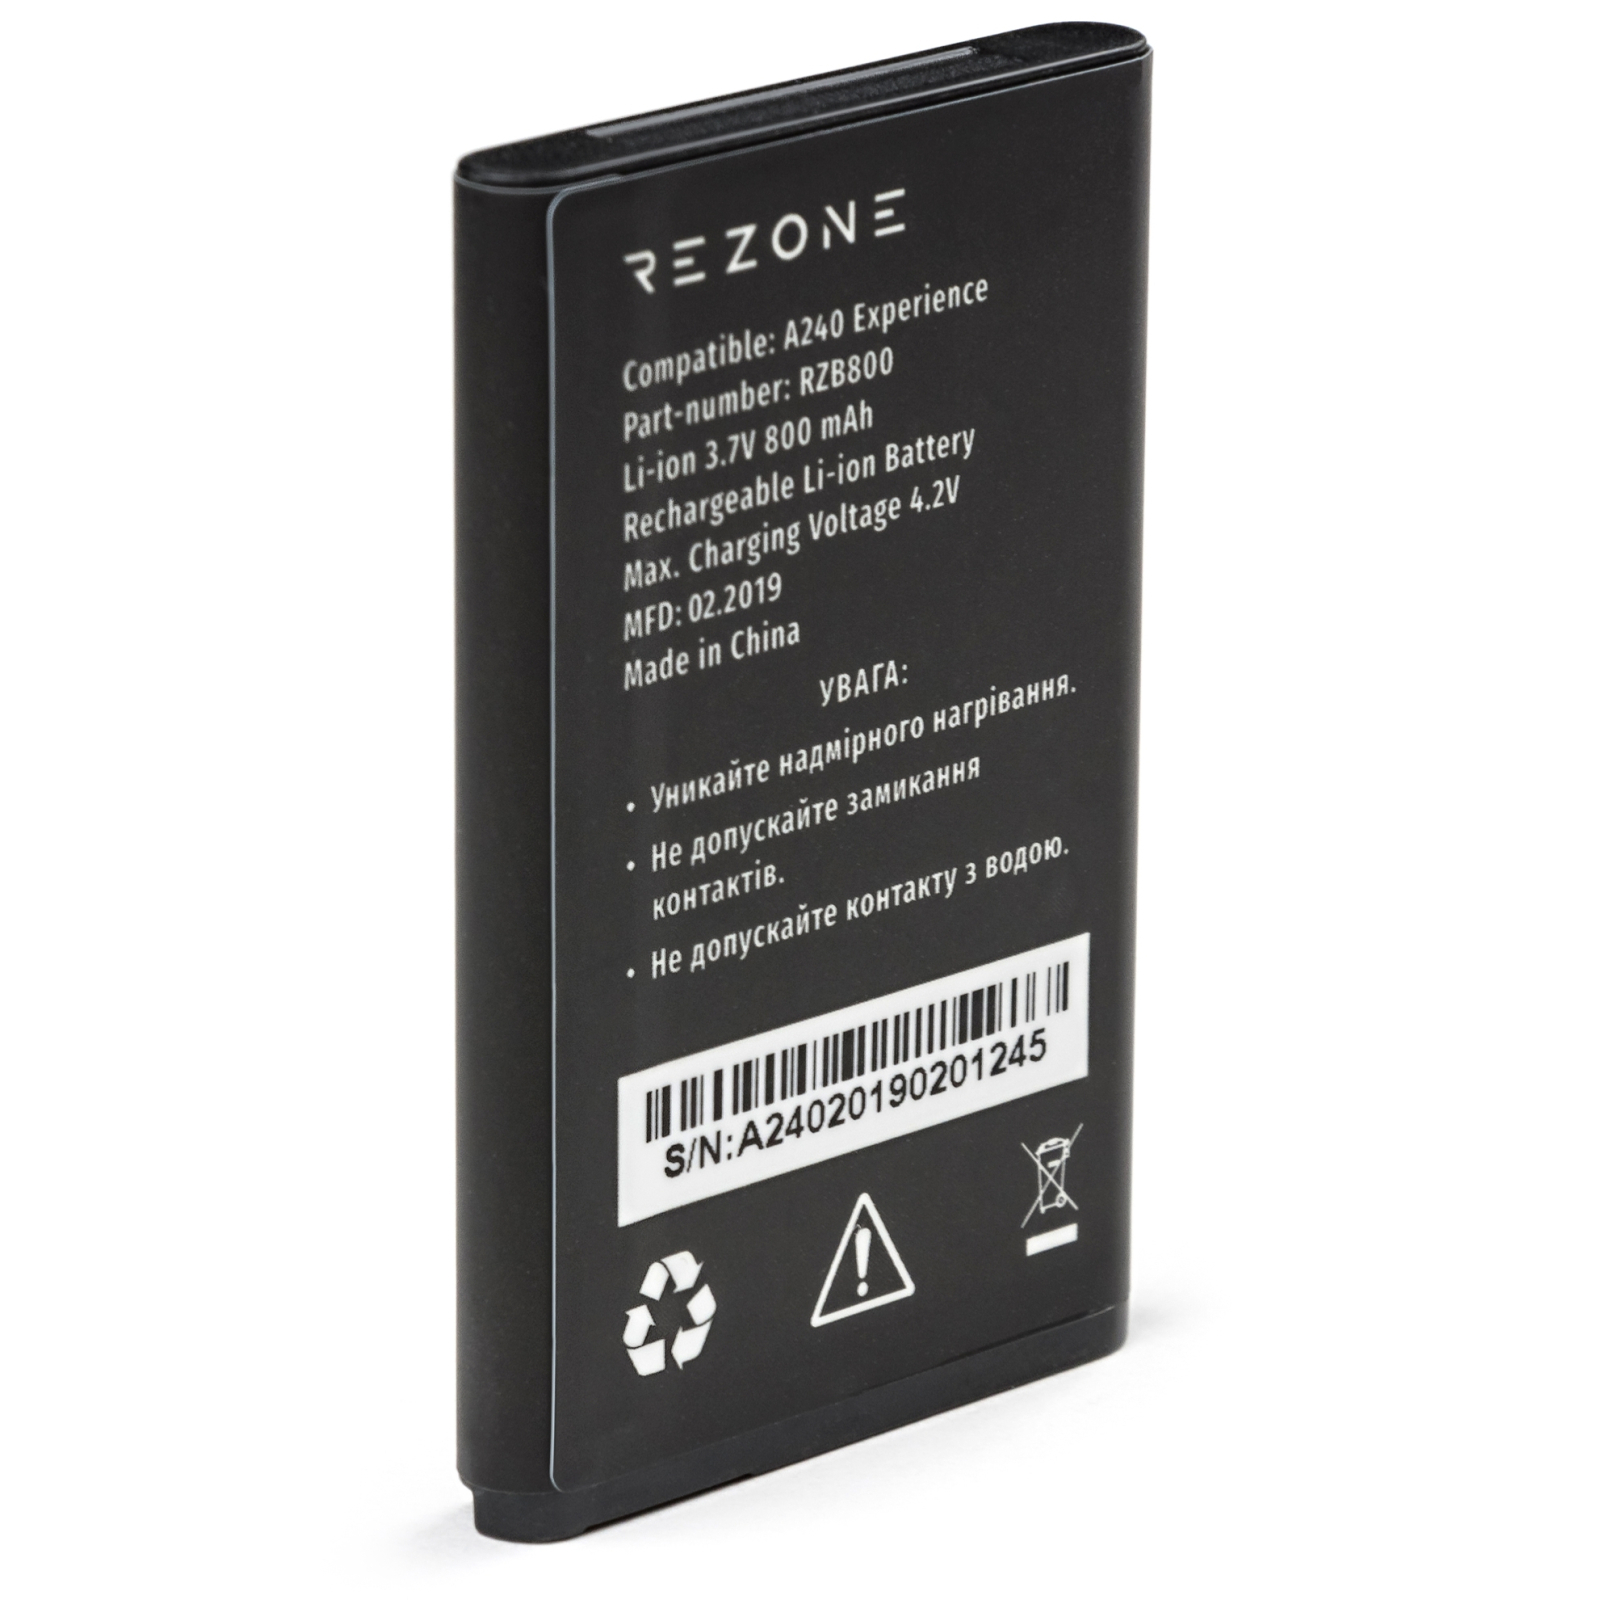 Аккумуляторная батарея Rezone for A240 Experience 800mah (and all compatible with BL-5C) (BL-5C) изображение 2